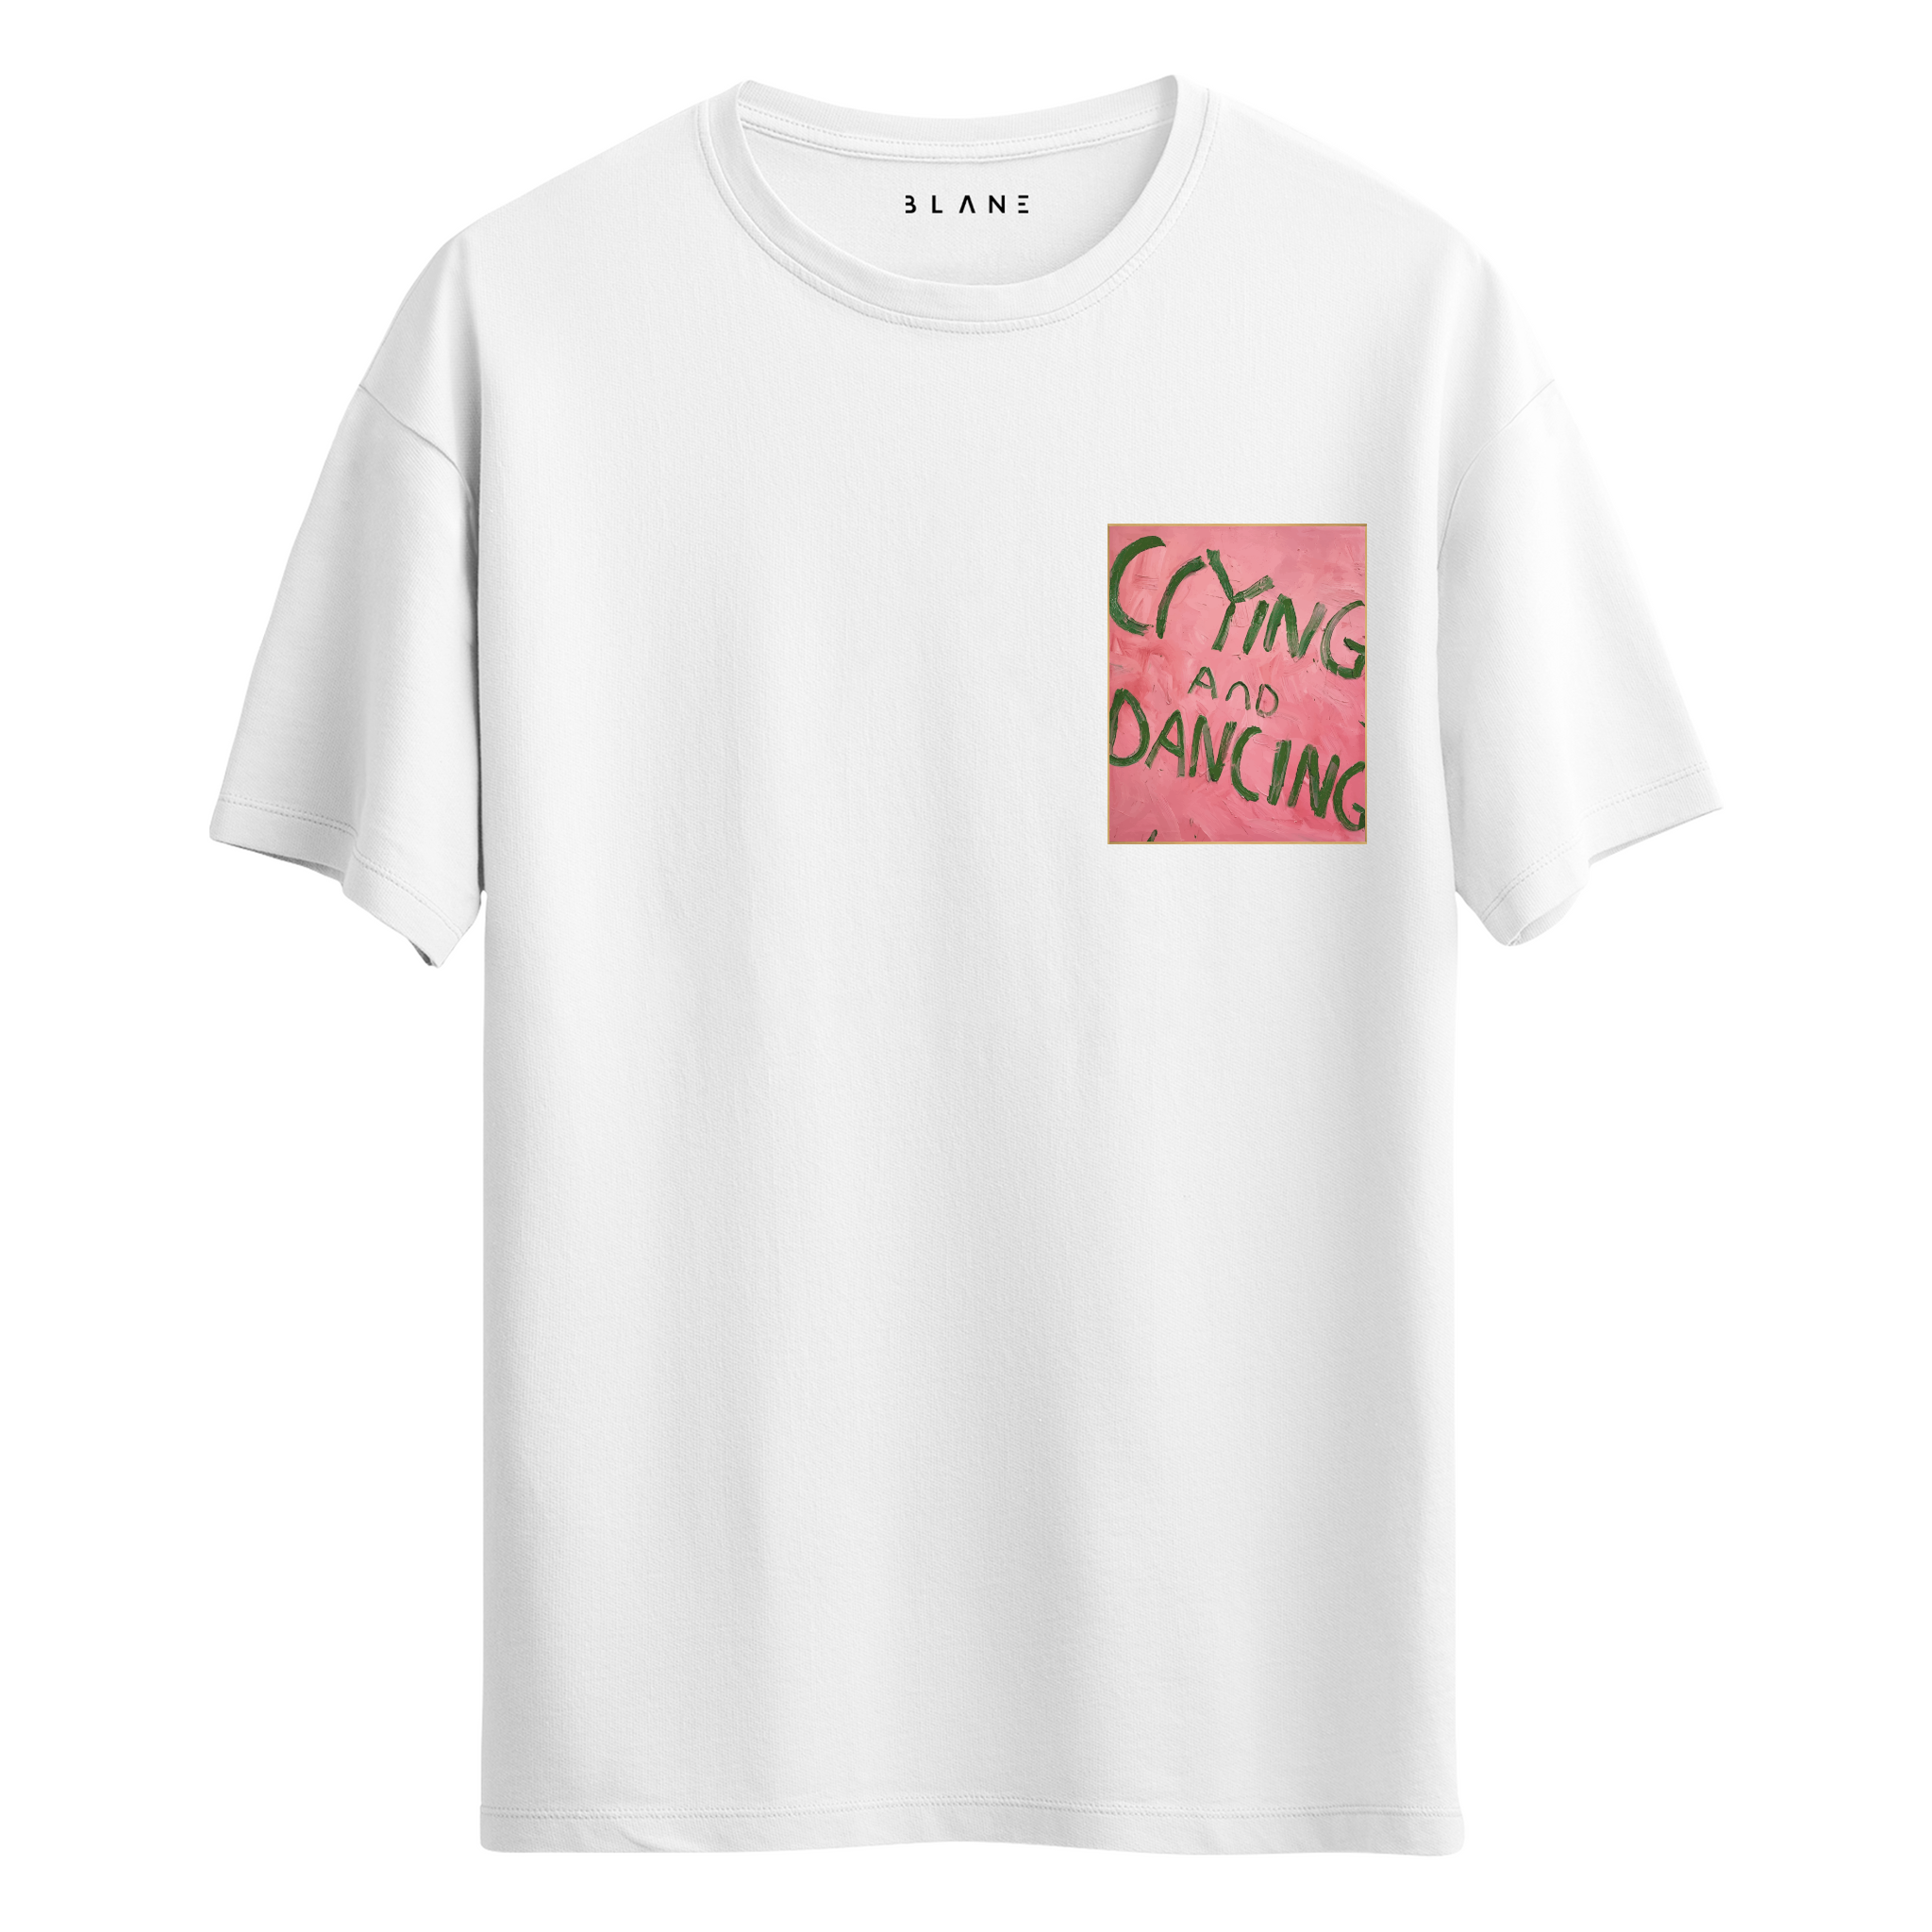 Crying And Dancing - T-Shirt